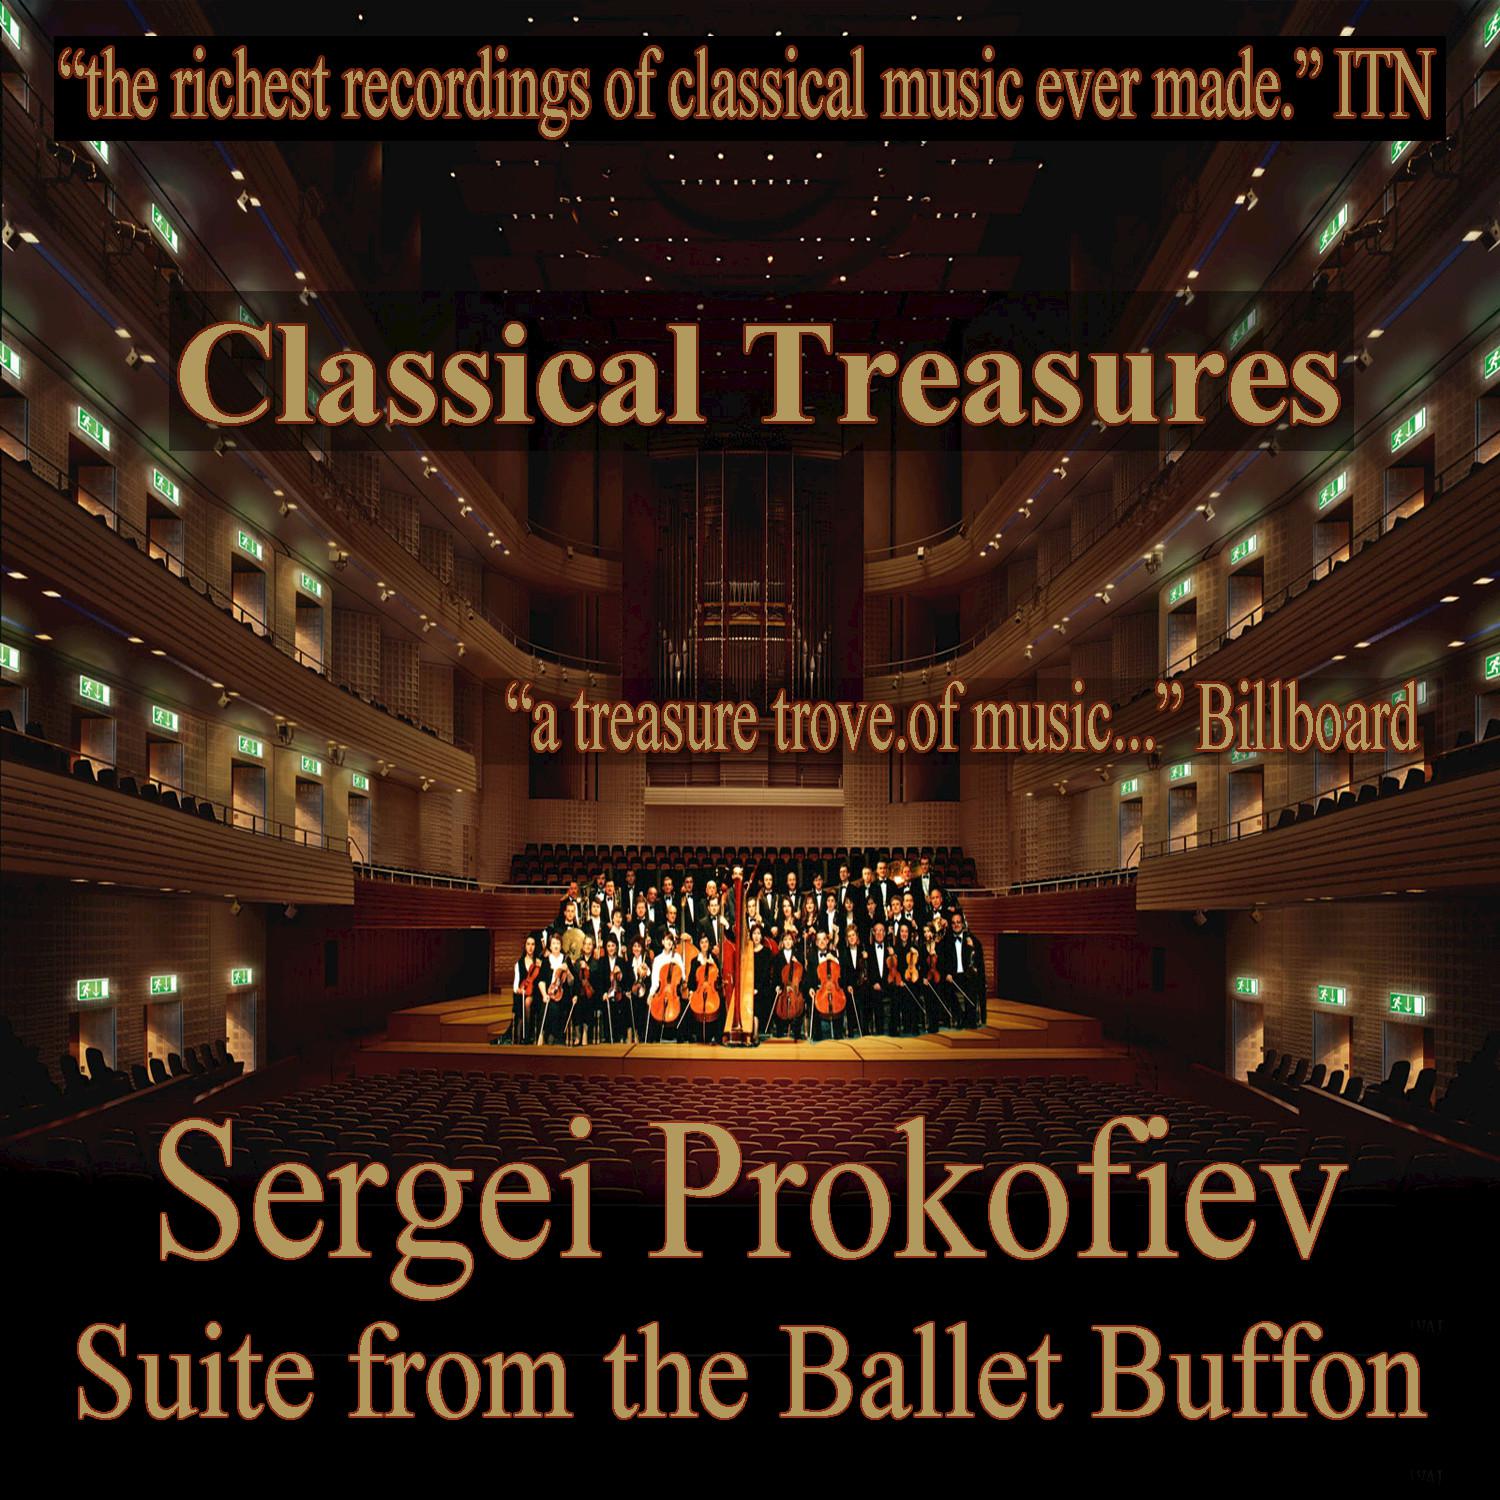 Suite from the Ballet "Buffon", Op. 21: VII. Merchant's Arrival, Dance of Bows and Choosing a Bride